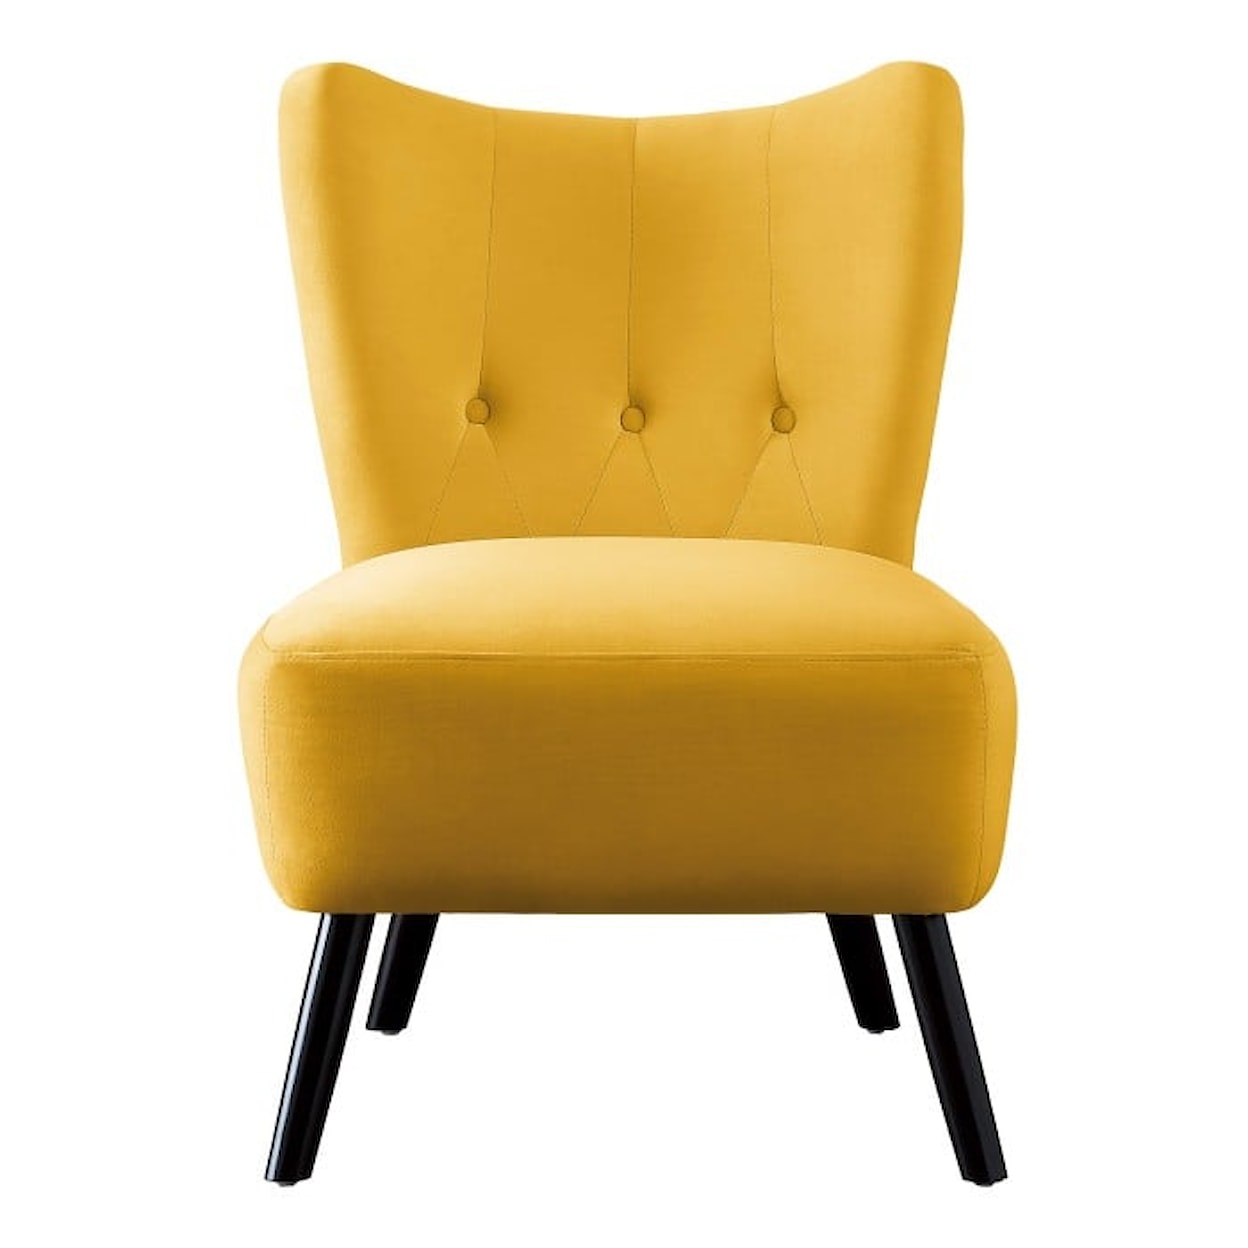 Homelegance Furniture Imani Accent Chair